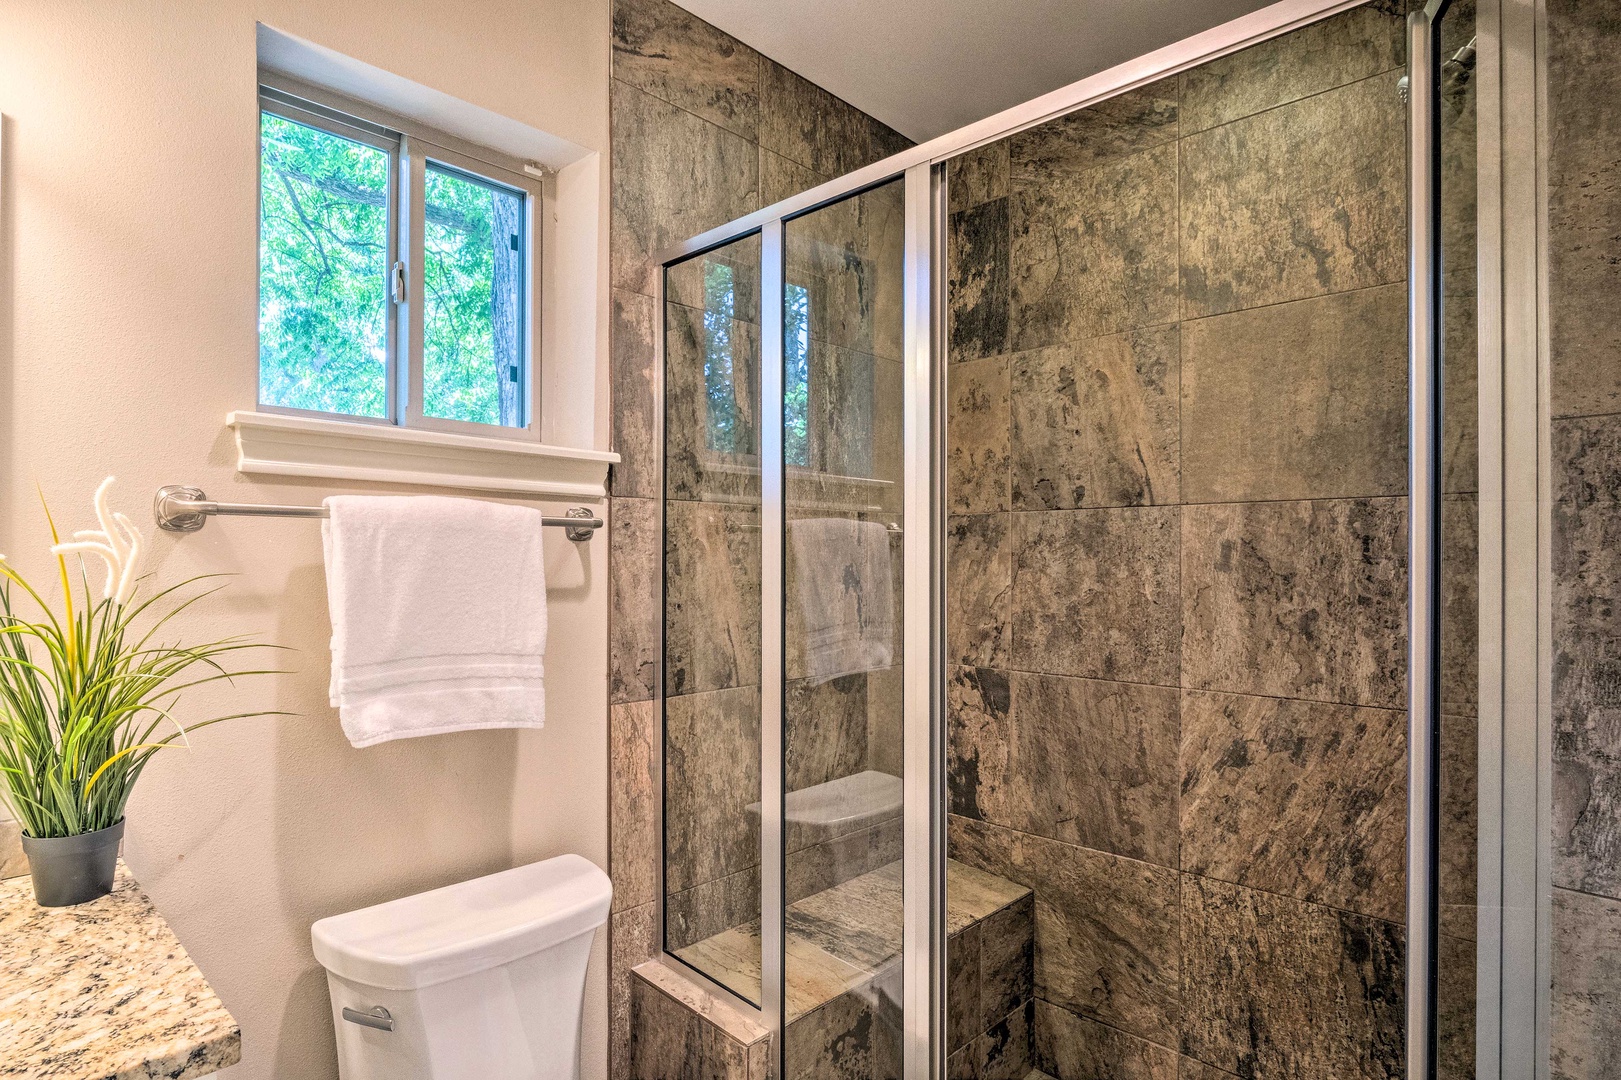 Studio bathroom with stand up shower